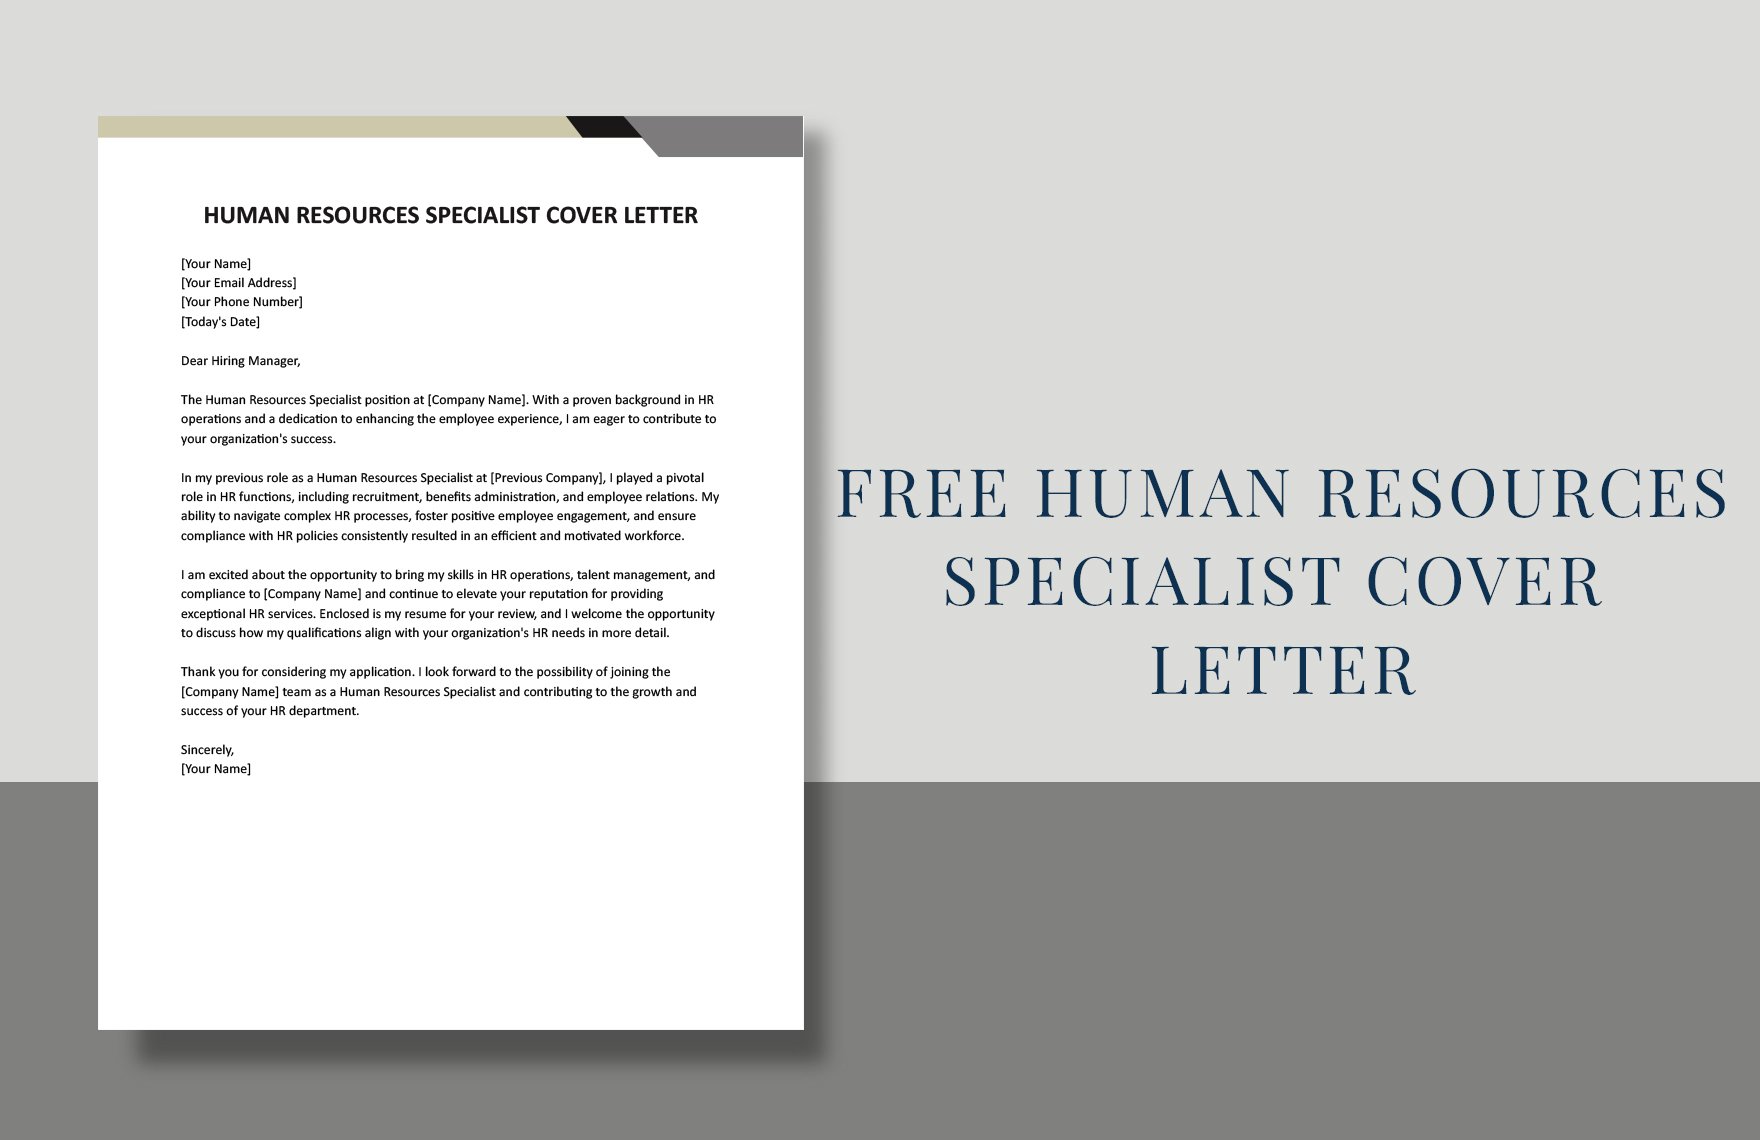 Human Resources Specialist Cover Letter